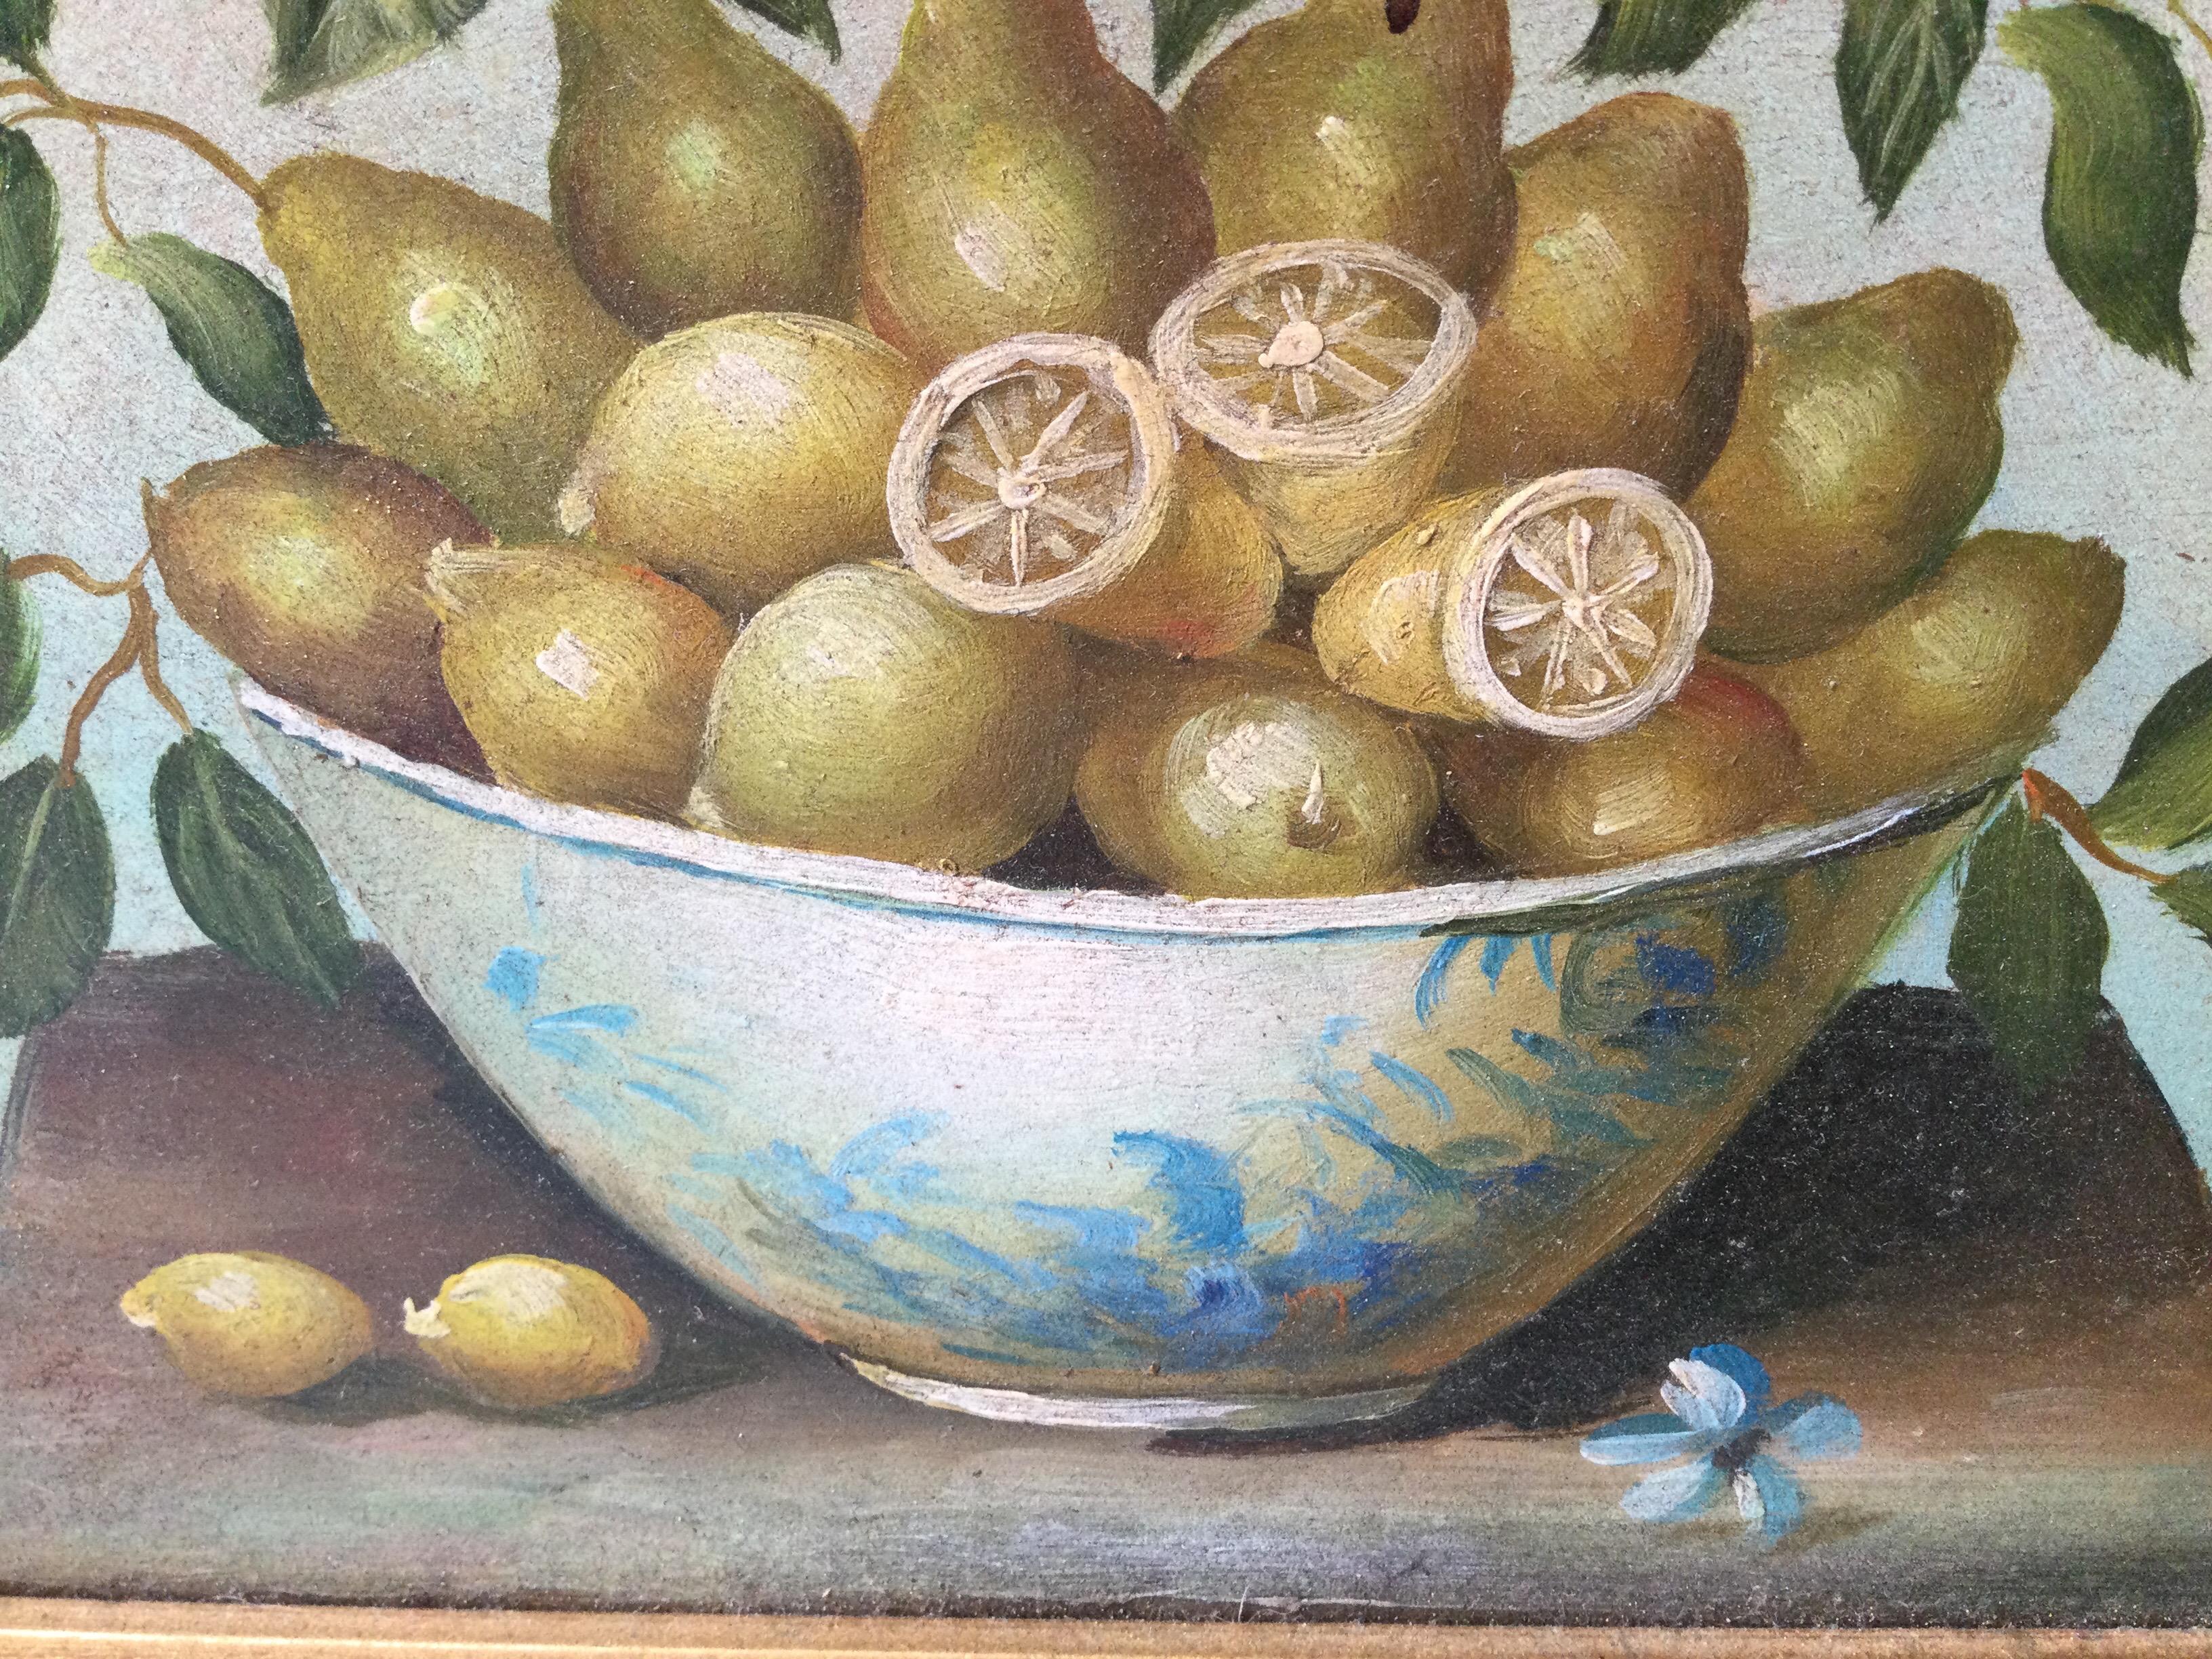 20th Century Oil Painting on Board of Pears and Lemons, Giltwood Frame